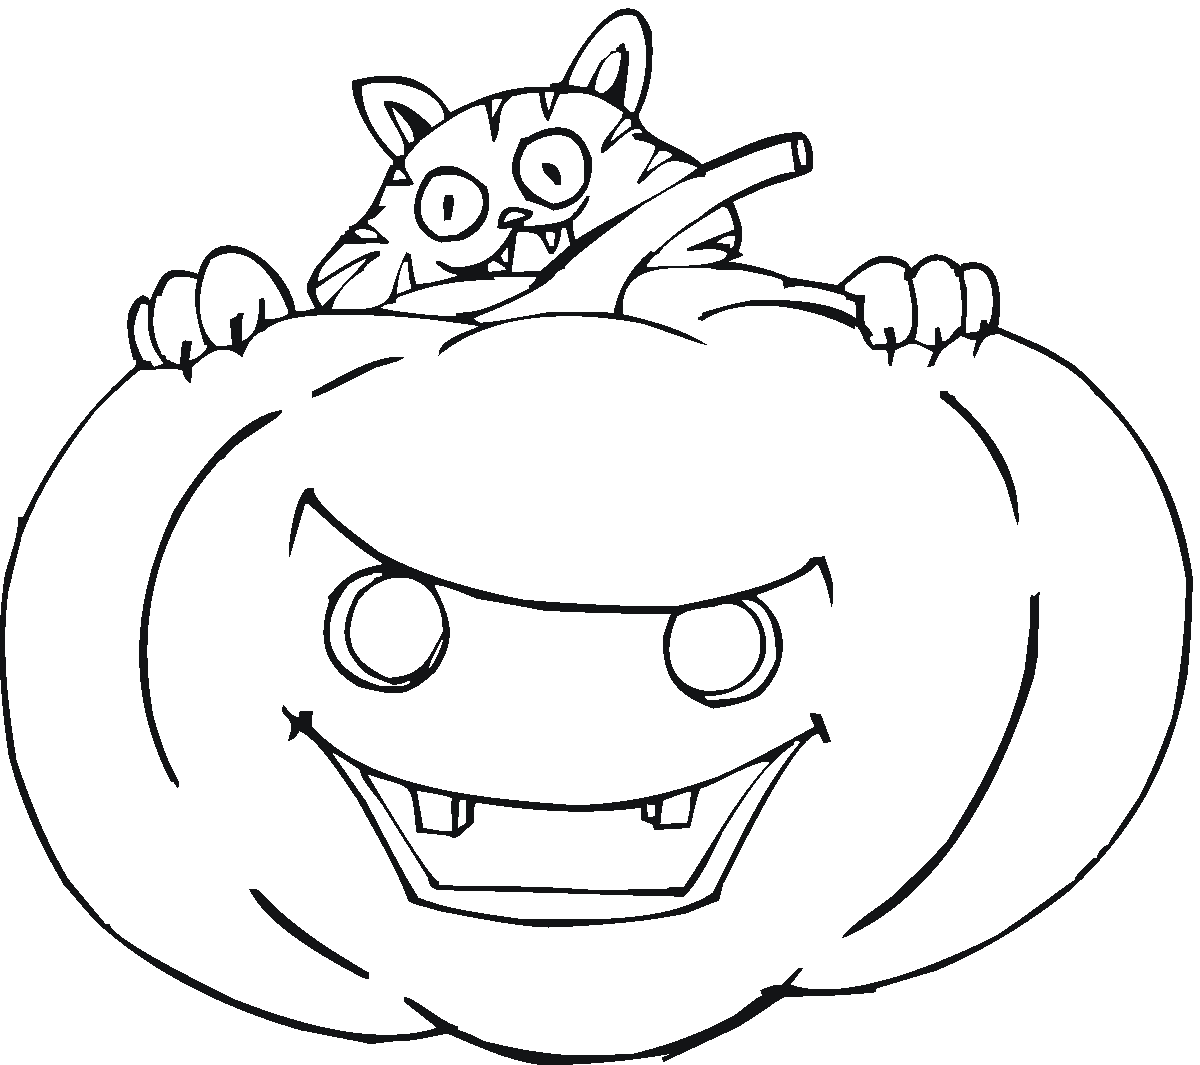 Coloring page: Pumpkin (Objects) #166869 - Free Printable Coloring Pages